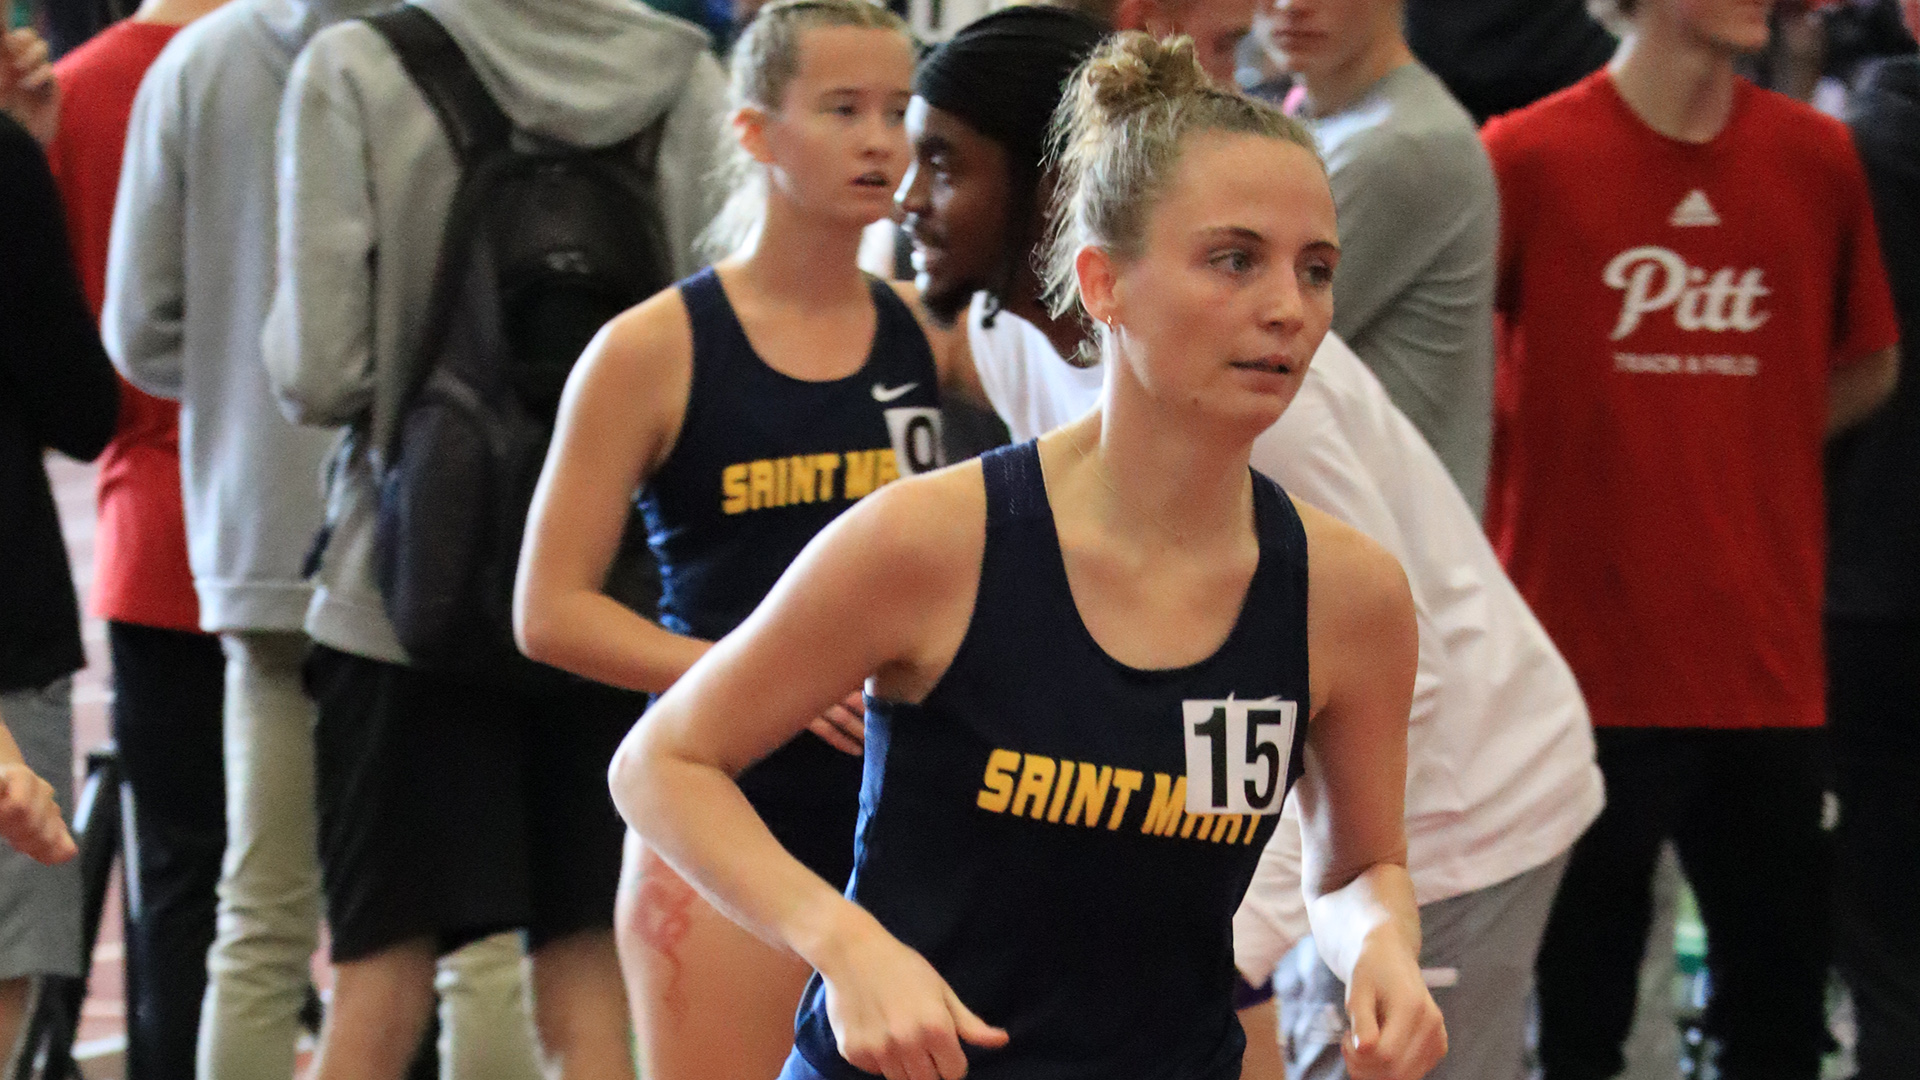 Spires Have Strong Weekend at Pitt State Invite